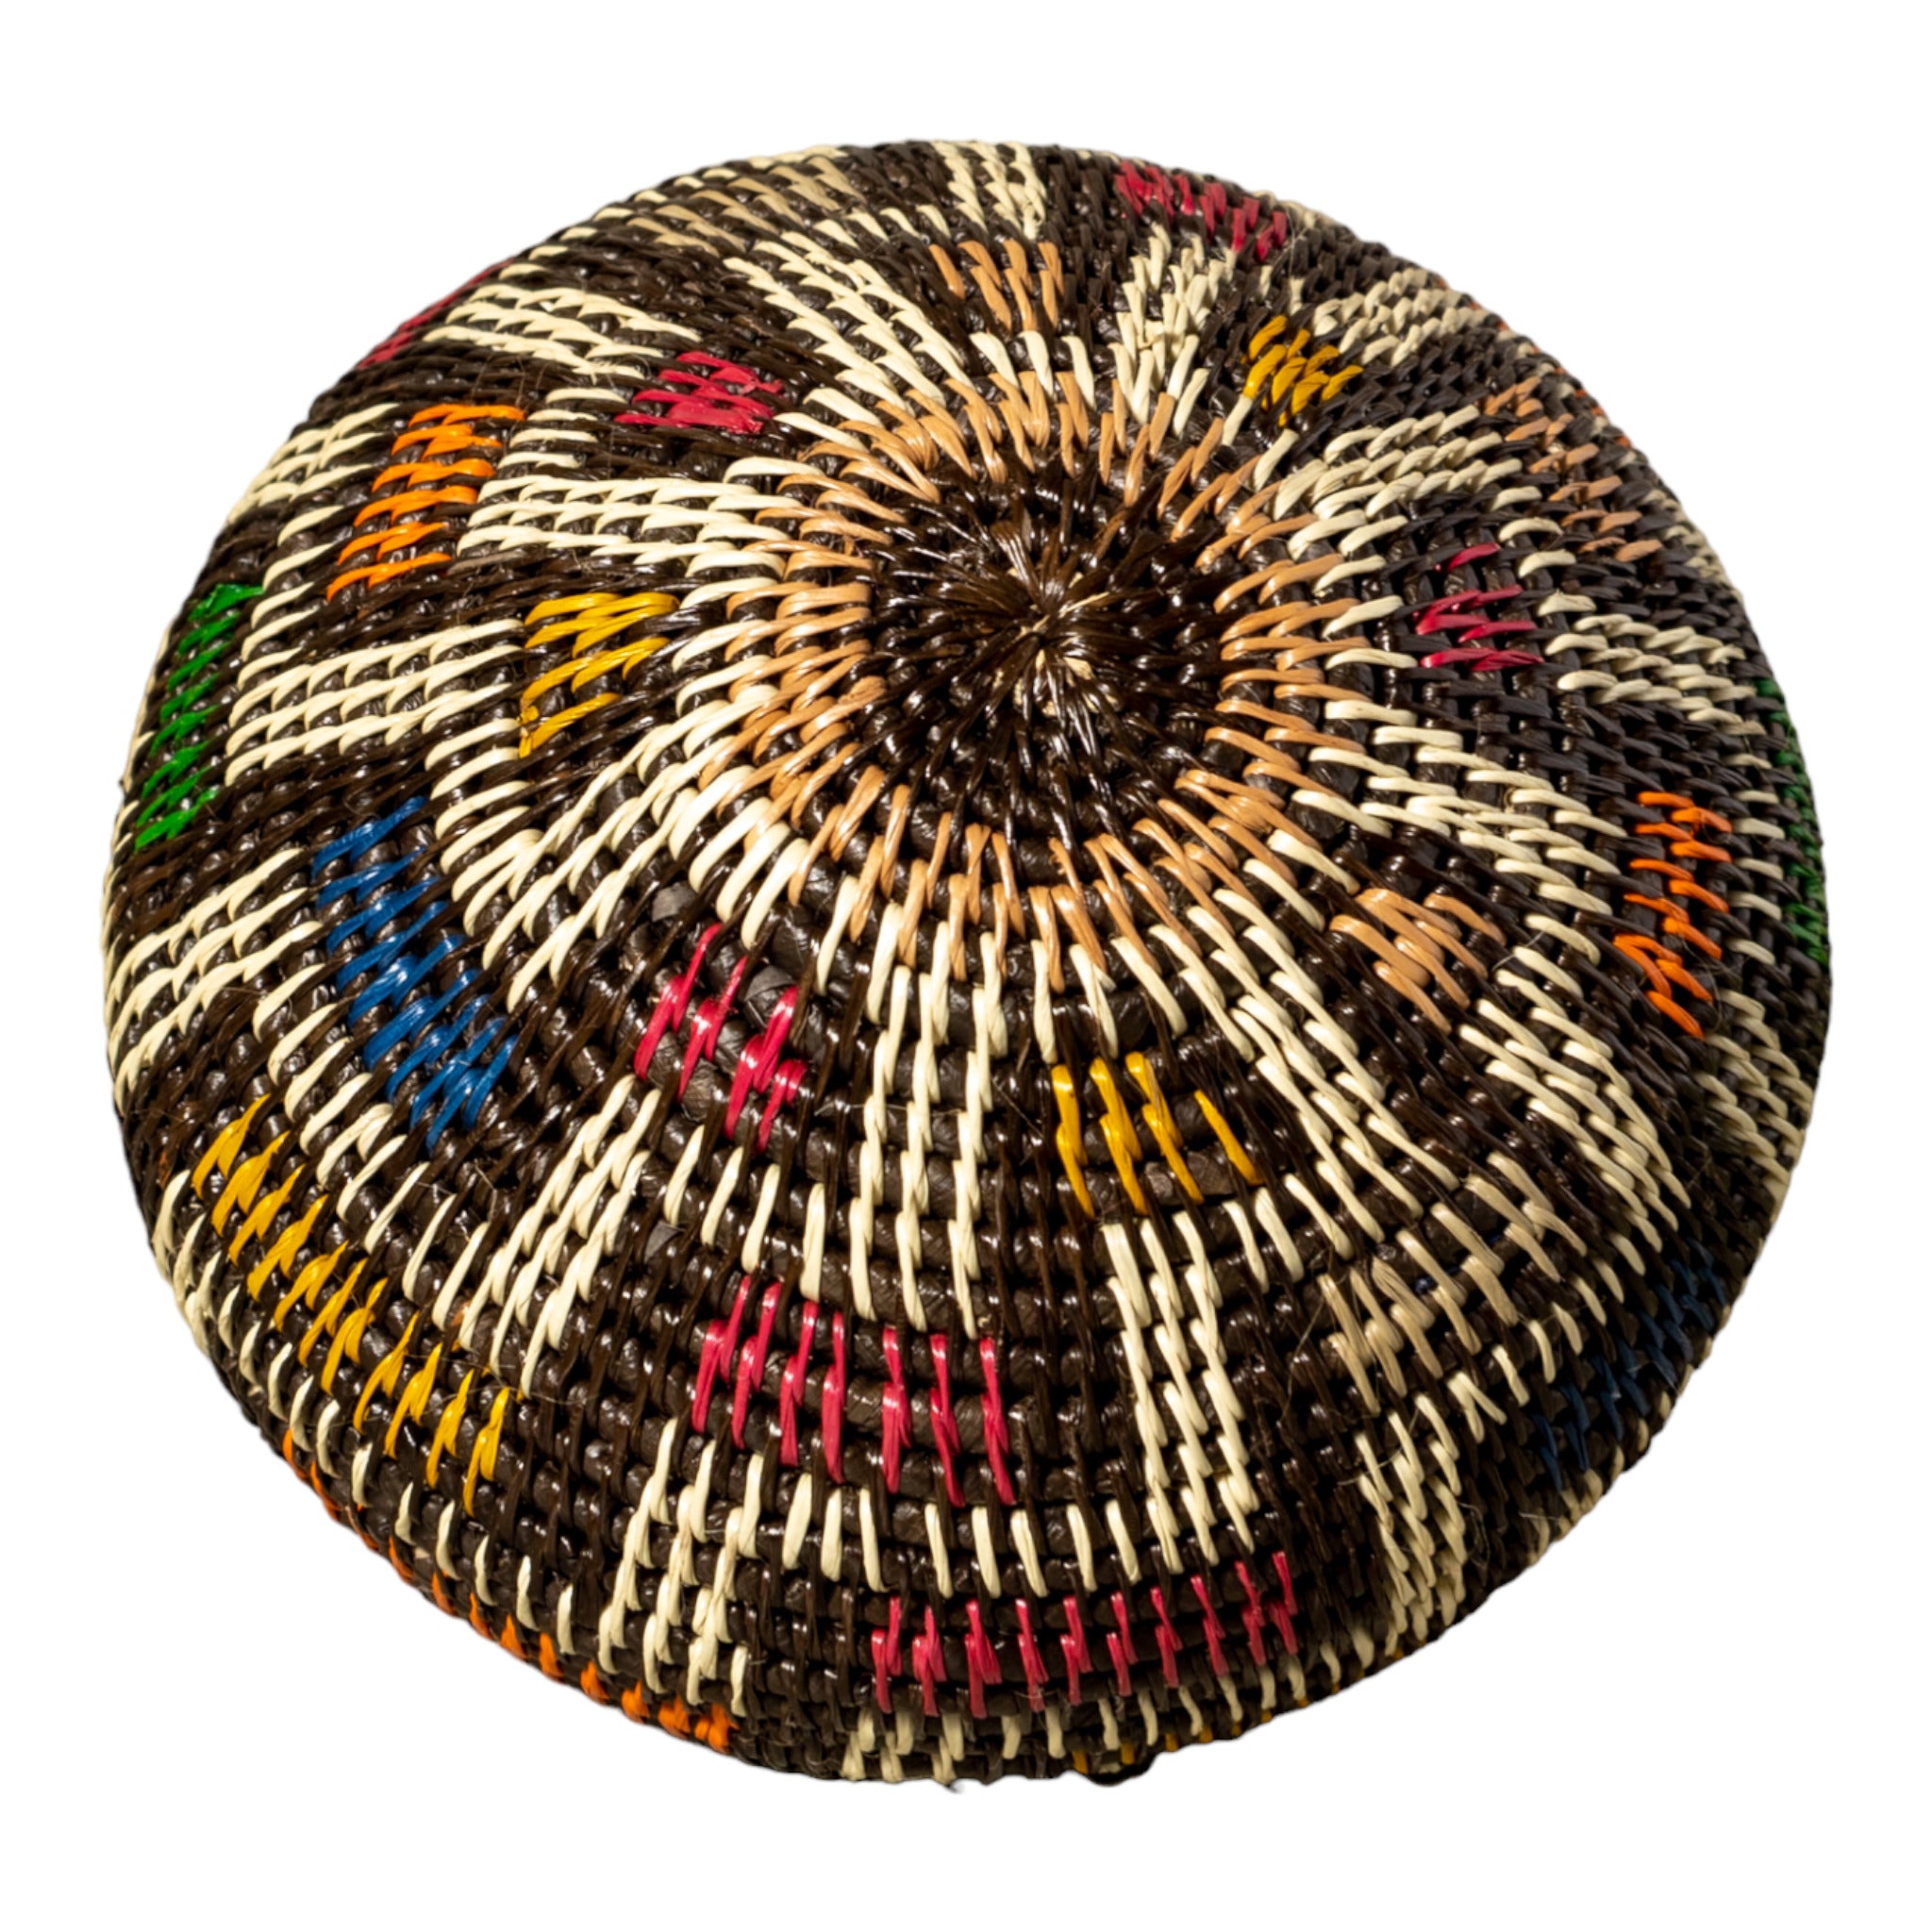 Rainbow Colors Woven Basket With Top